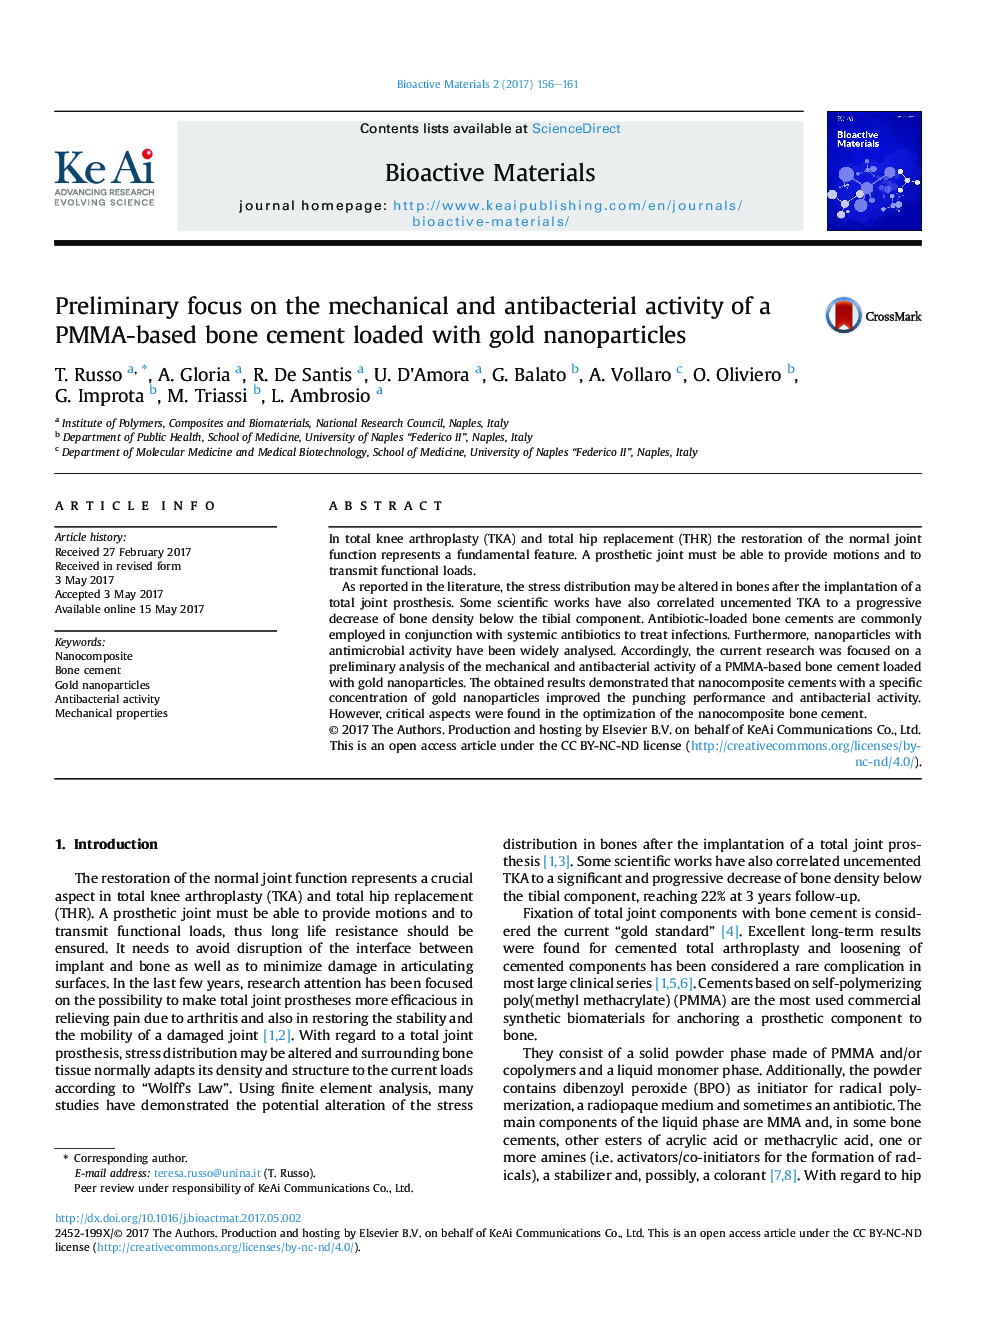 Preliminary focus on the mechanical and antibacterial activity of a PMMA-based bone cement loaded with gold nanoparticles